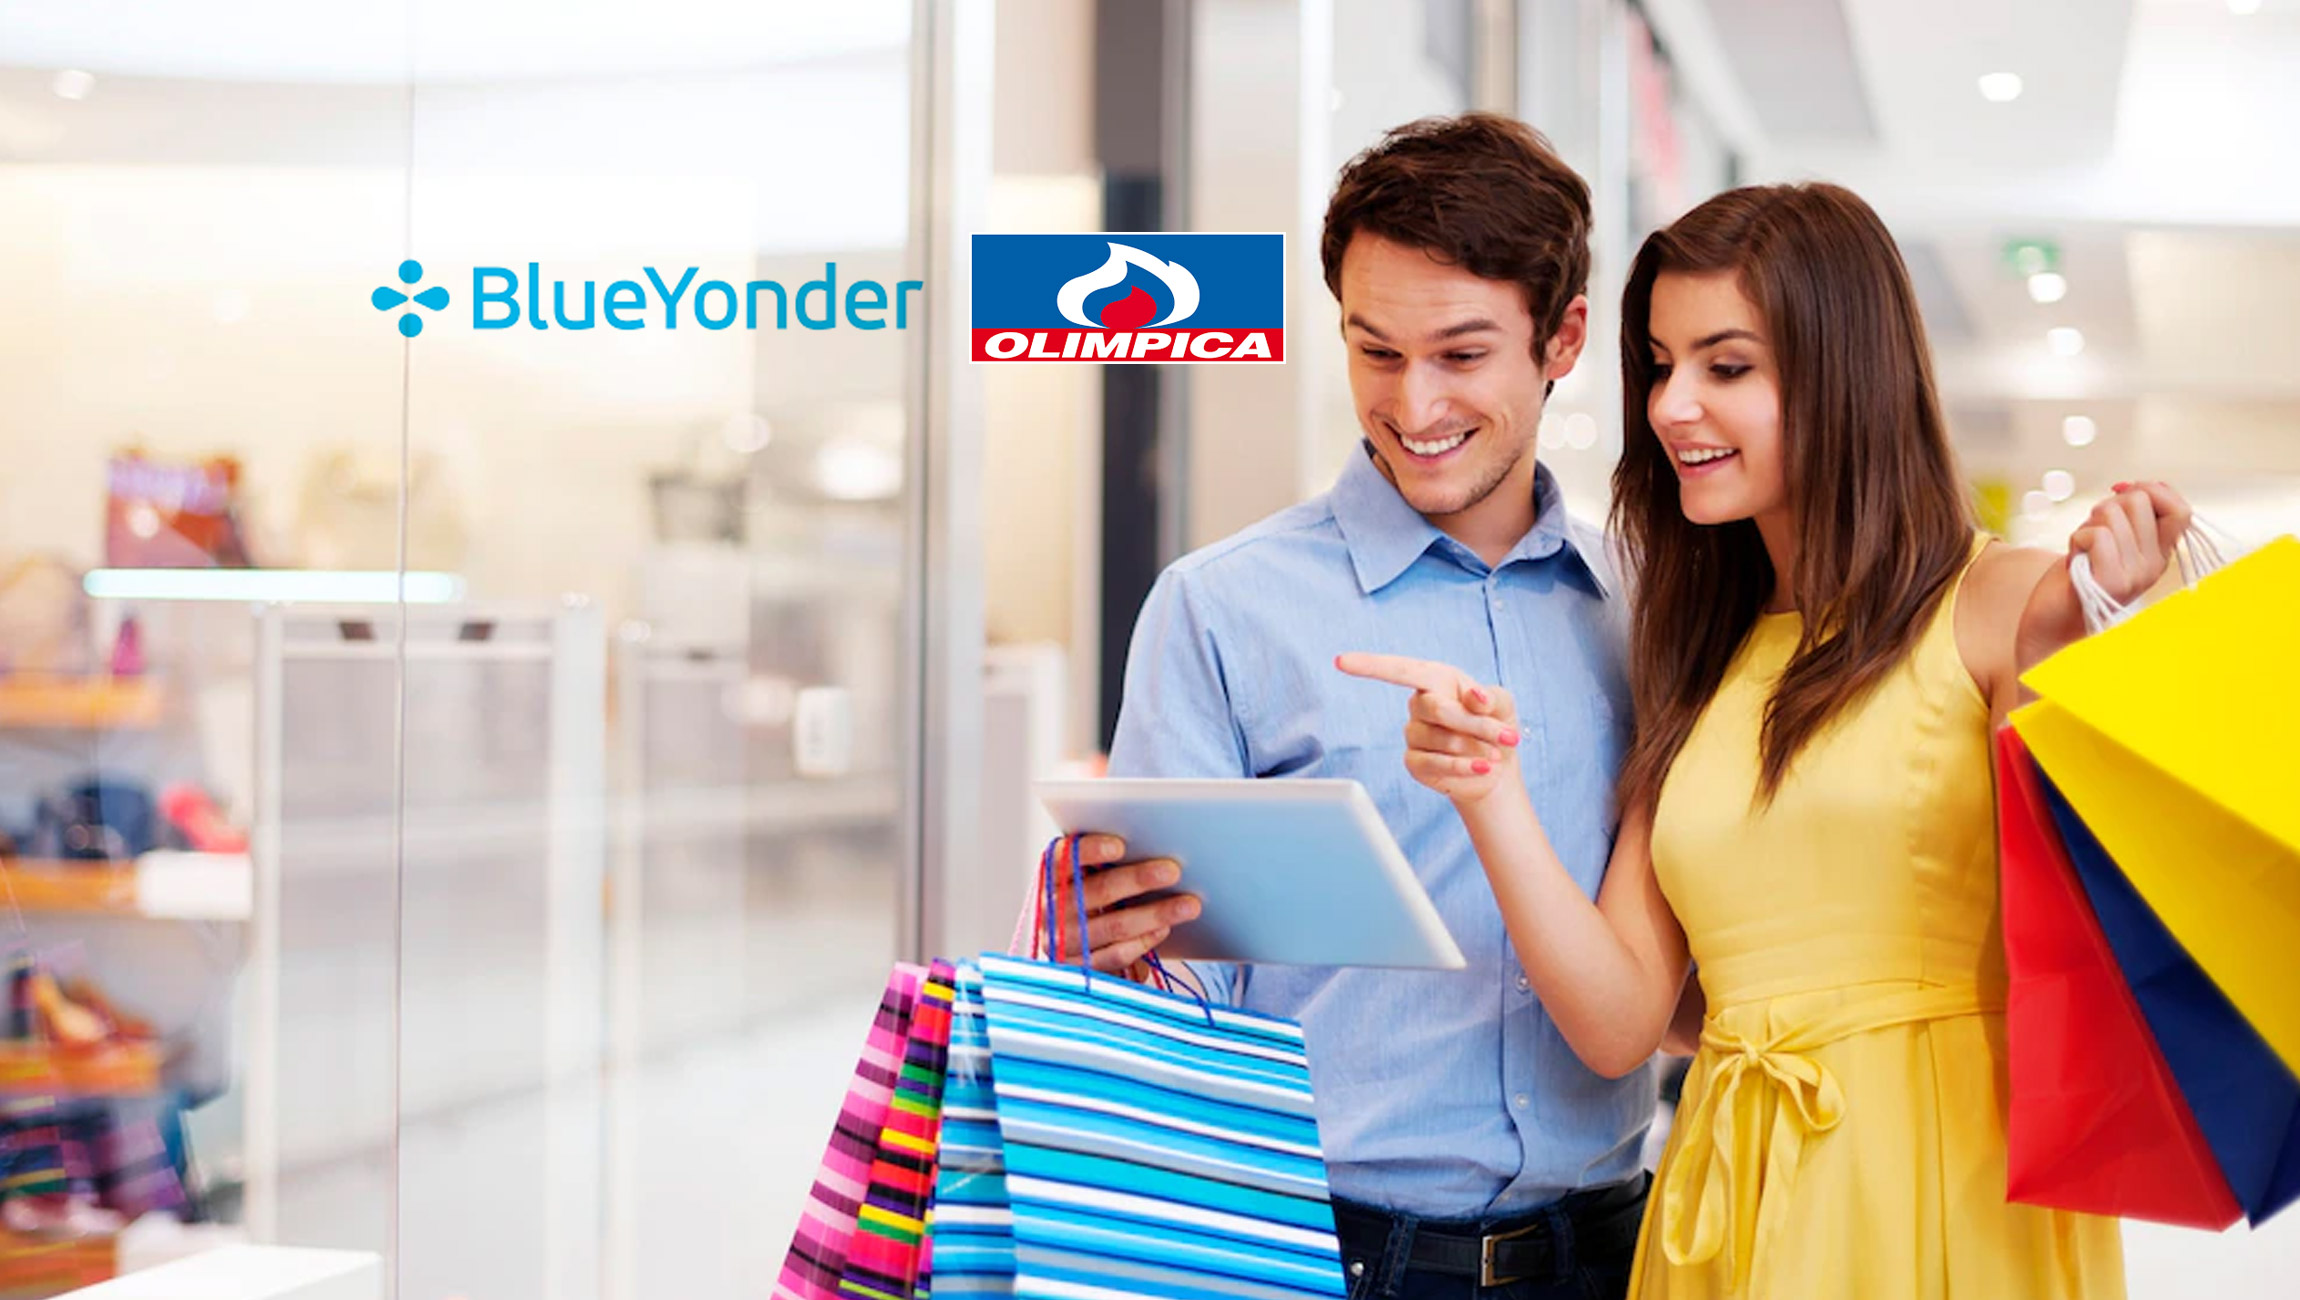 Blue Yonder Has Been Selected by Olímpica to Boost Product Placement in Stores